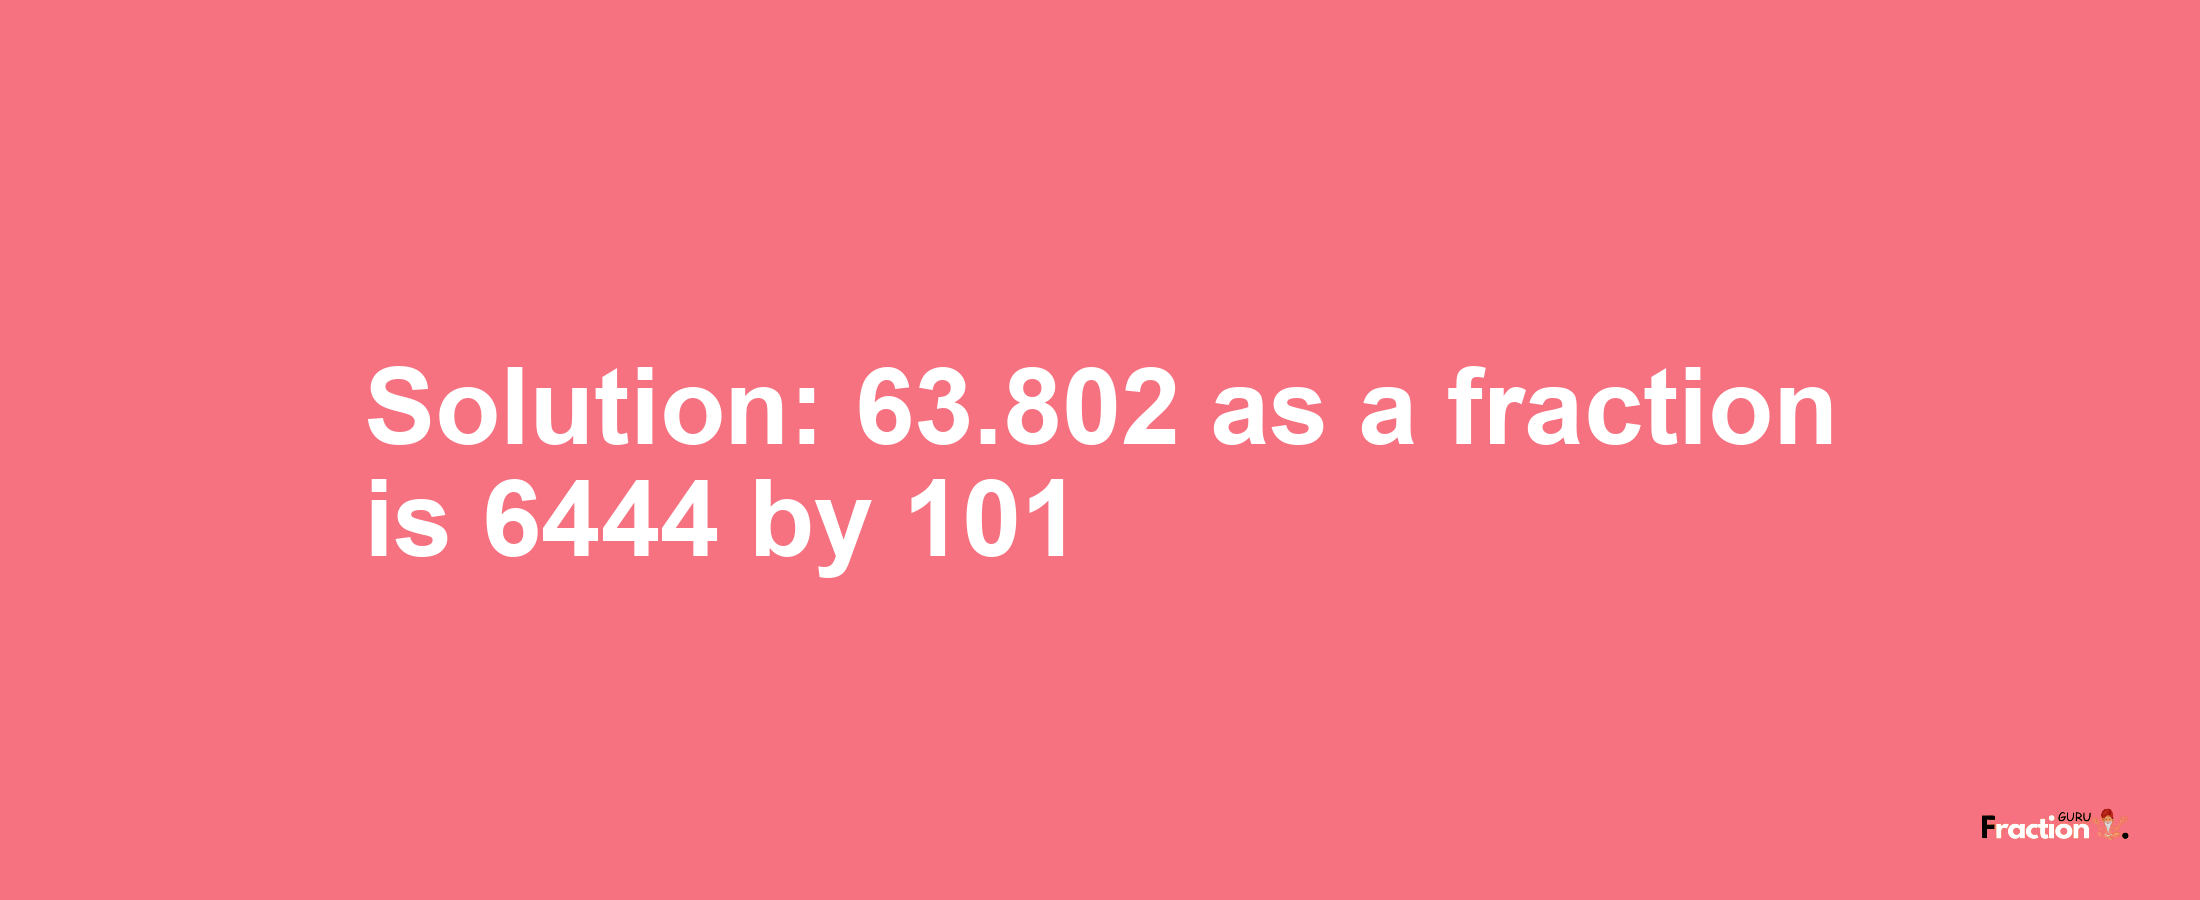 Solution:63.802 as a fraction is 6444/101